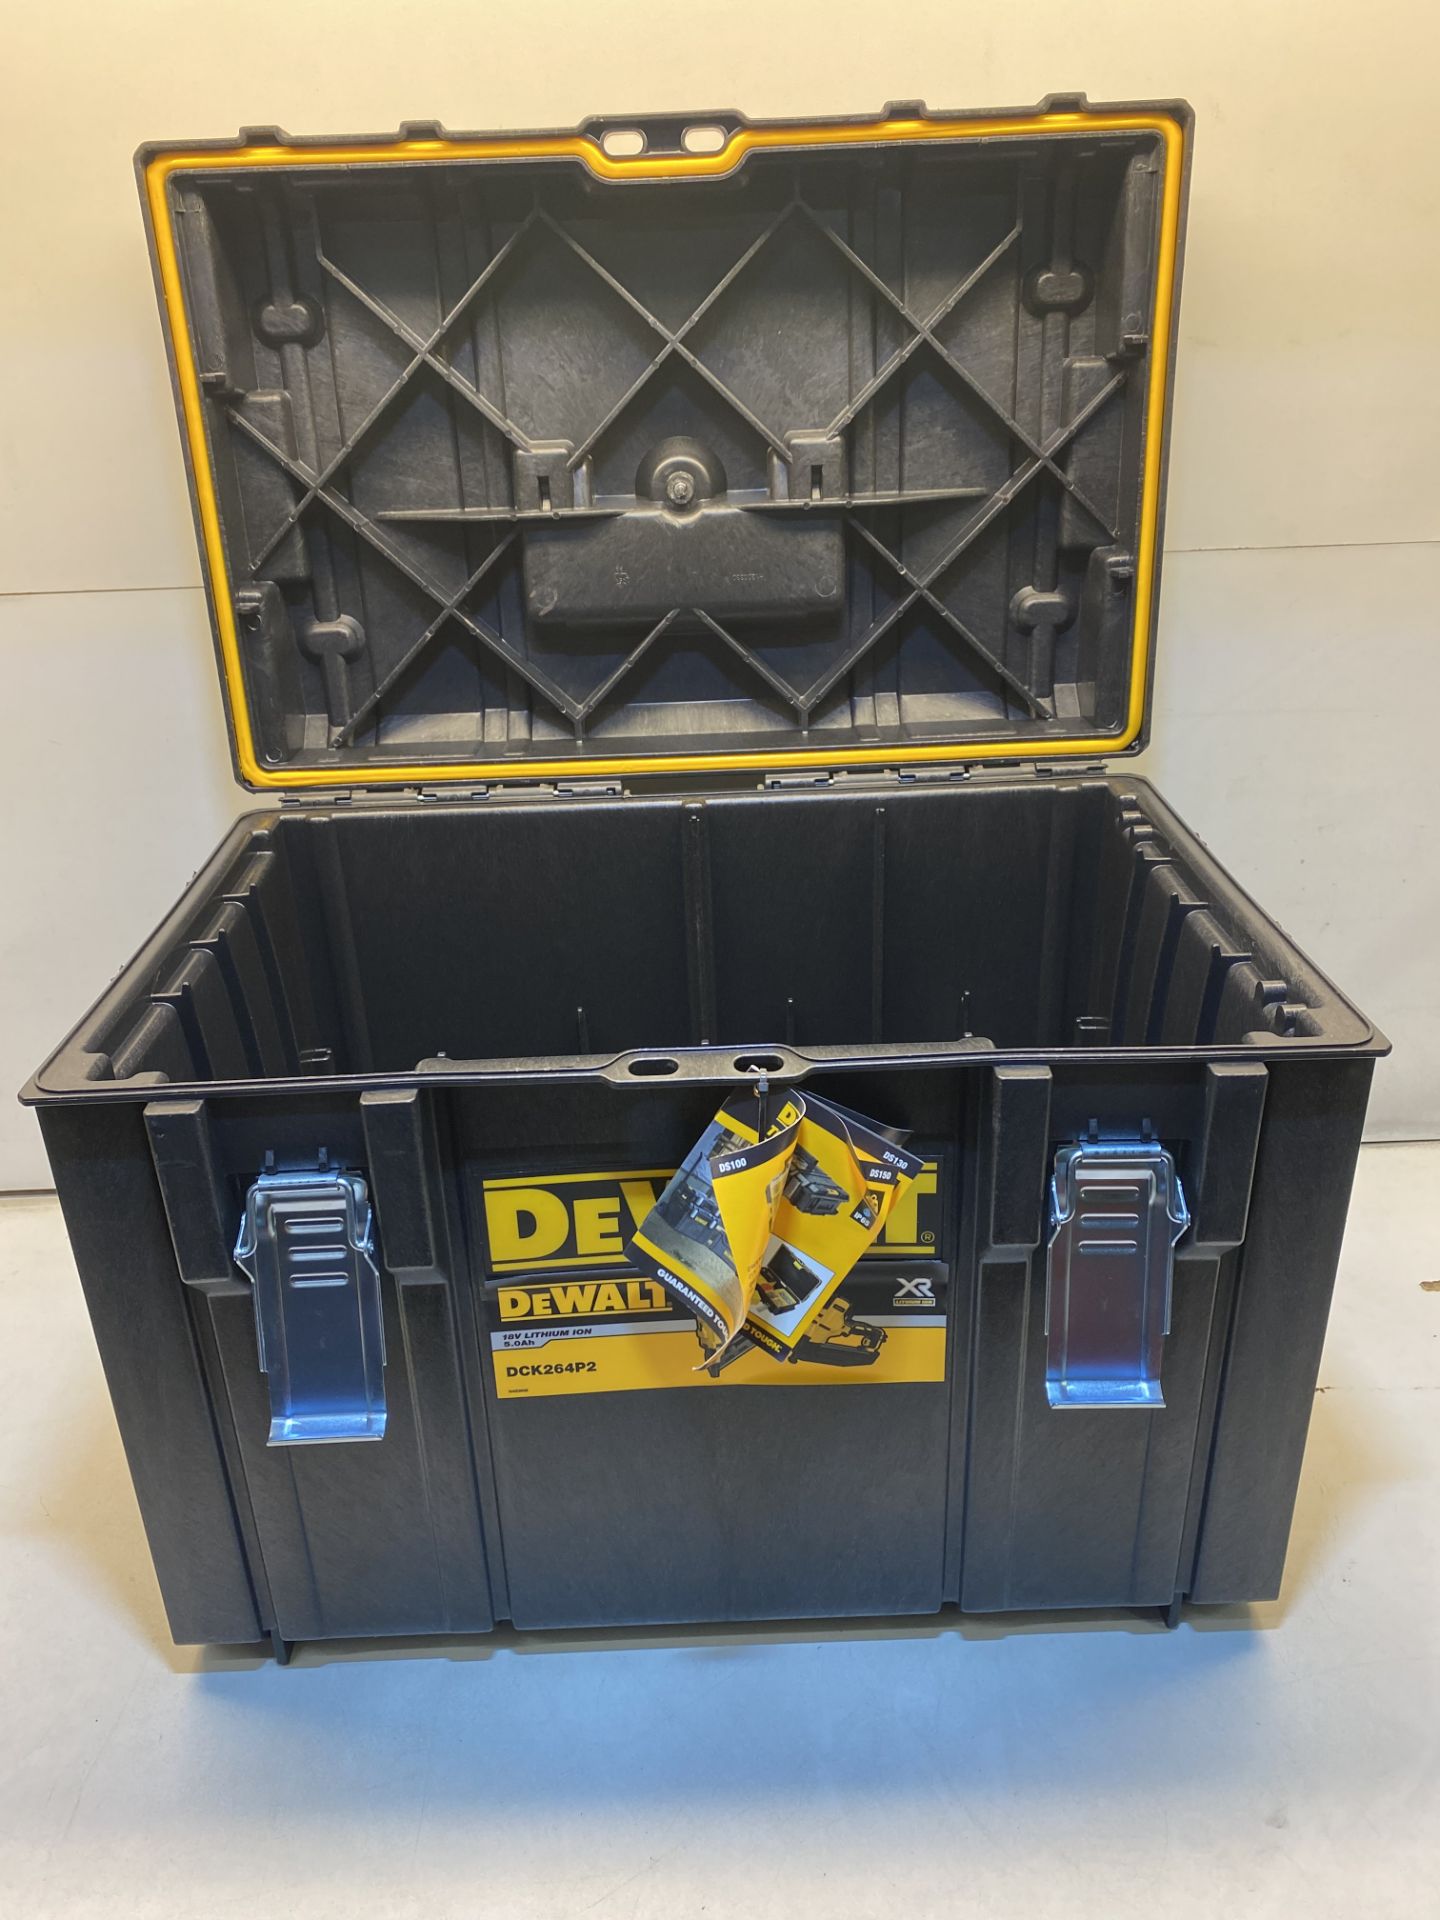 DeWalt DCK264P2 1st and 2nd Fix Nailer Twin Kit T-STAK CARRY CASE, Nailer Kits Not Inlcluded! Case O - Image 3 of 4